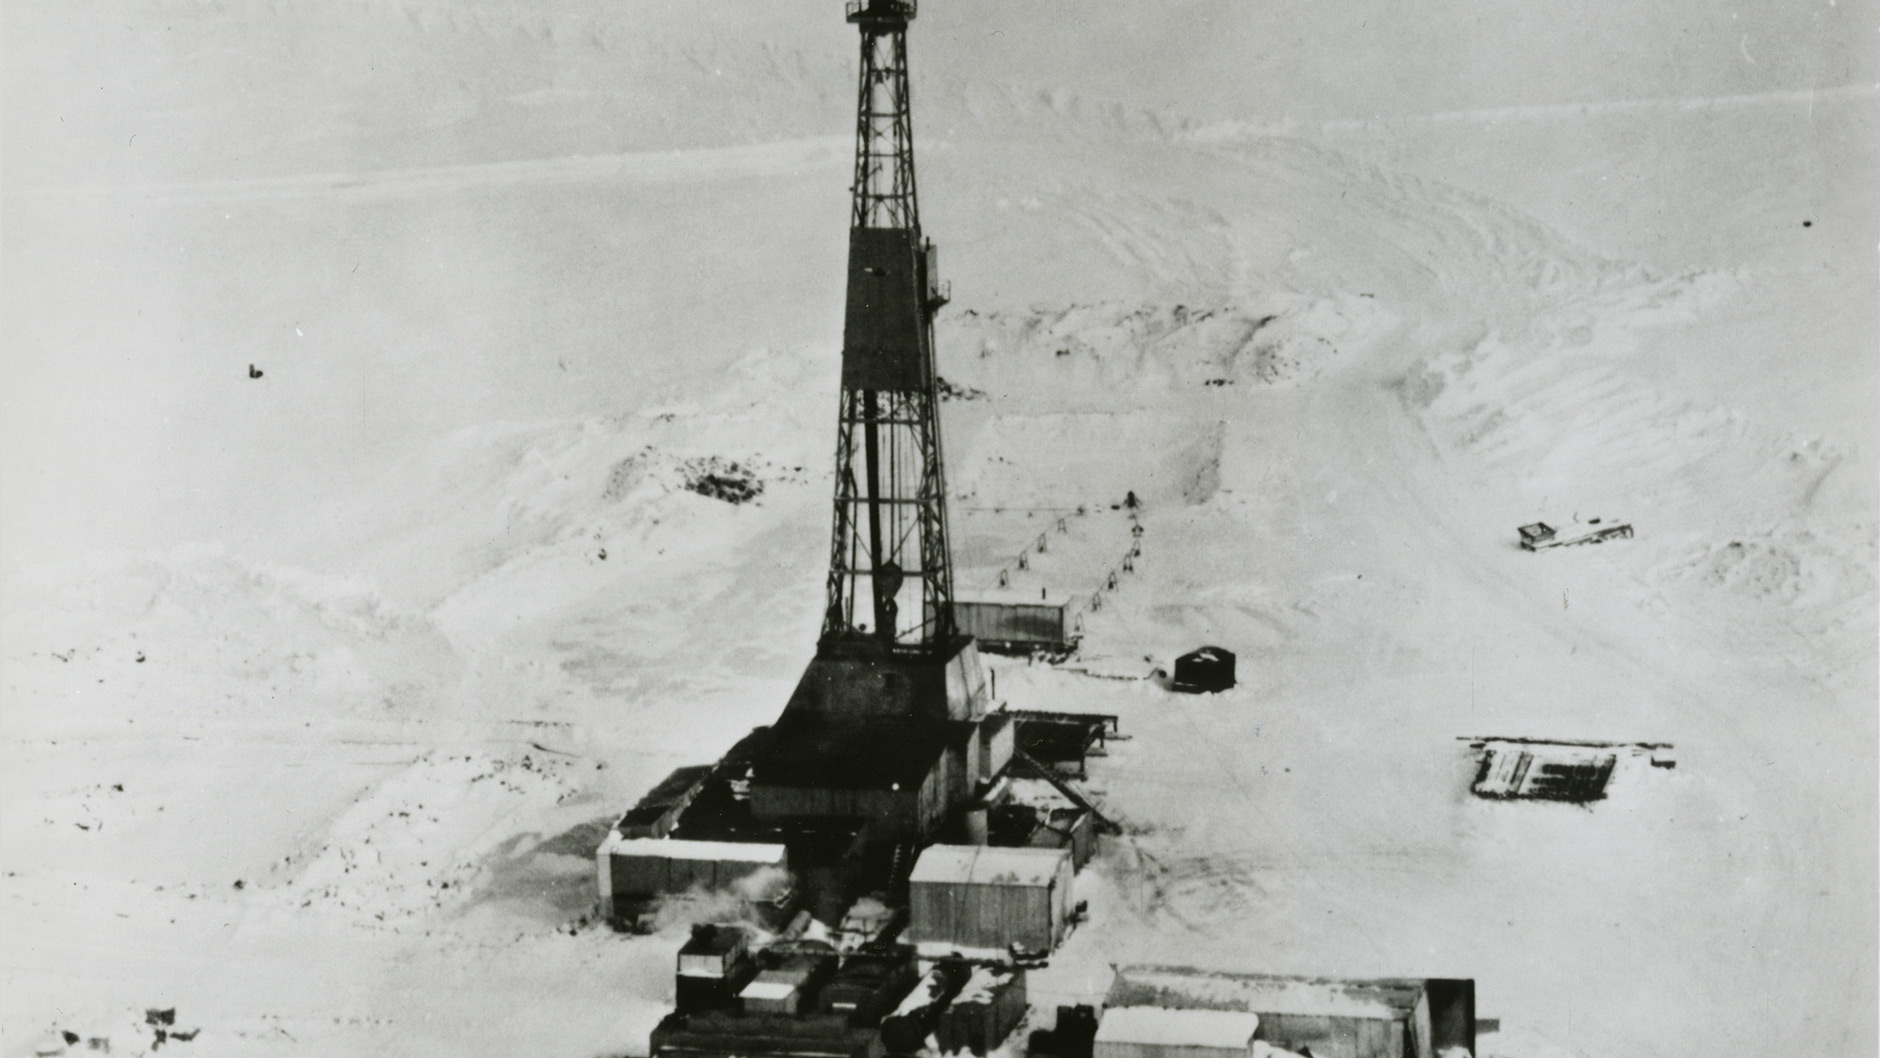 Historical photo of the prudhoe bay discovery well.